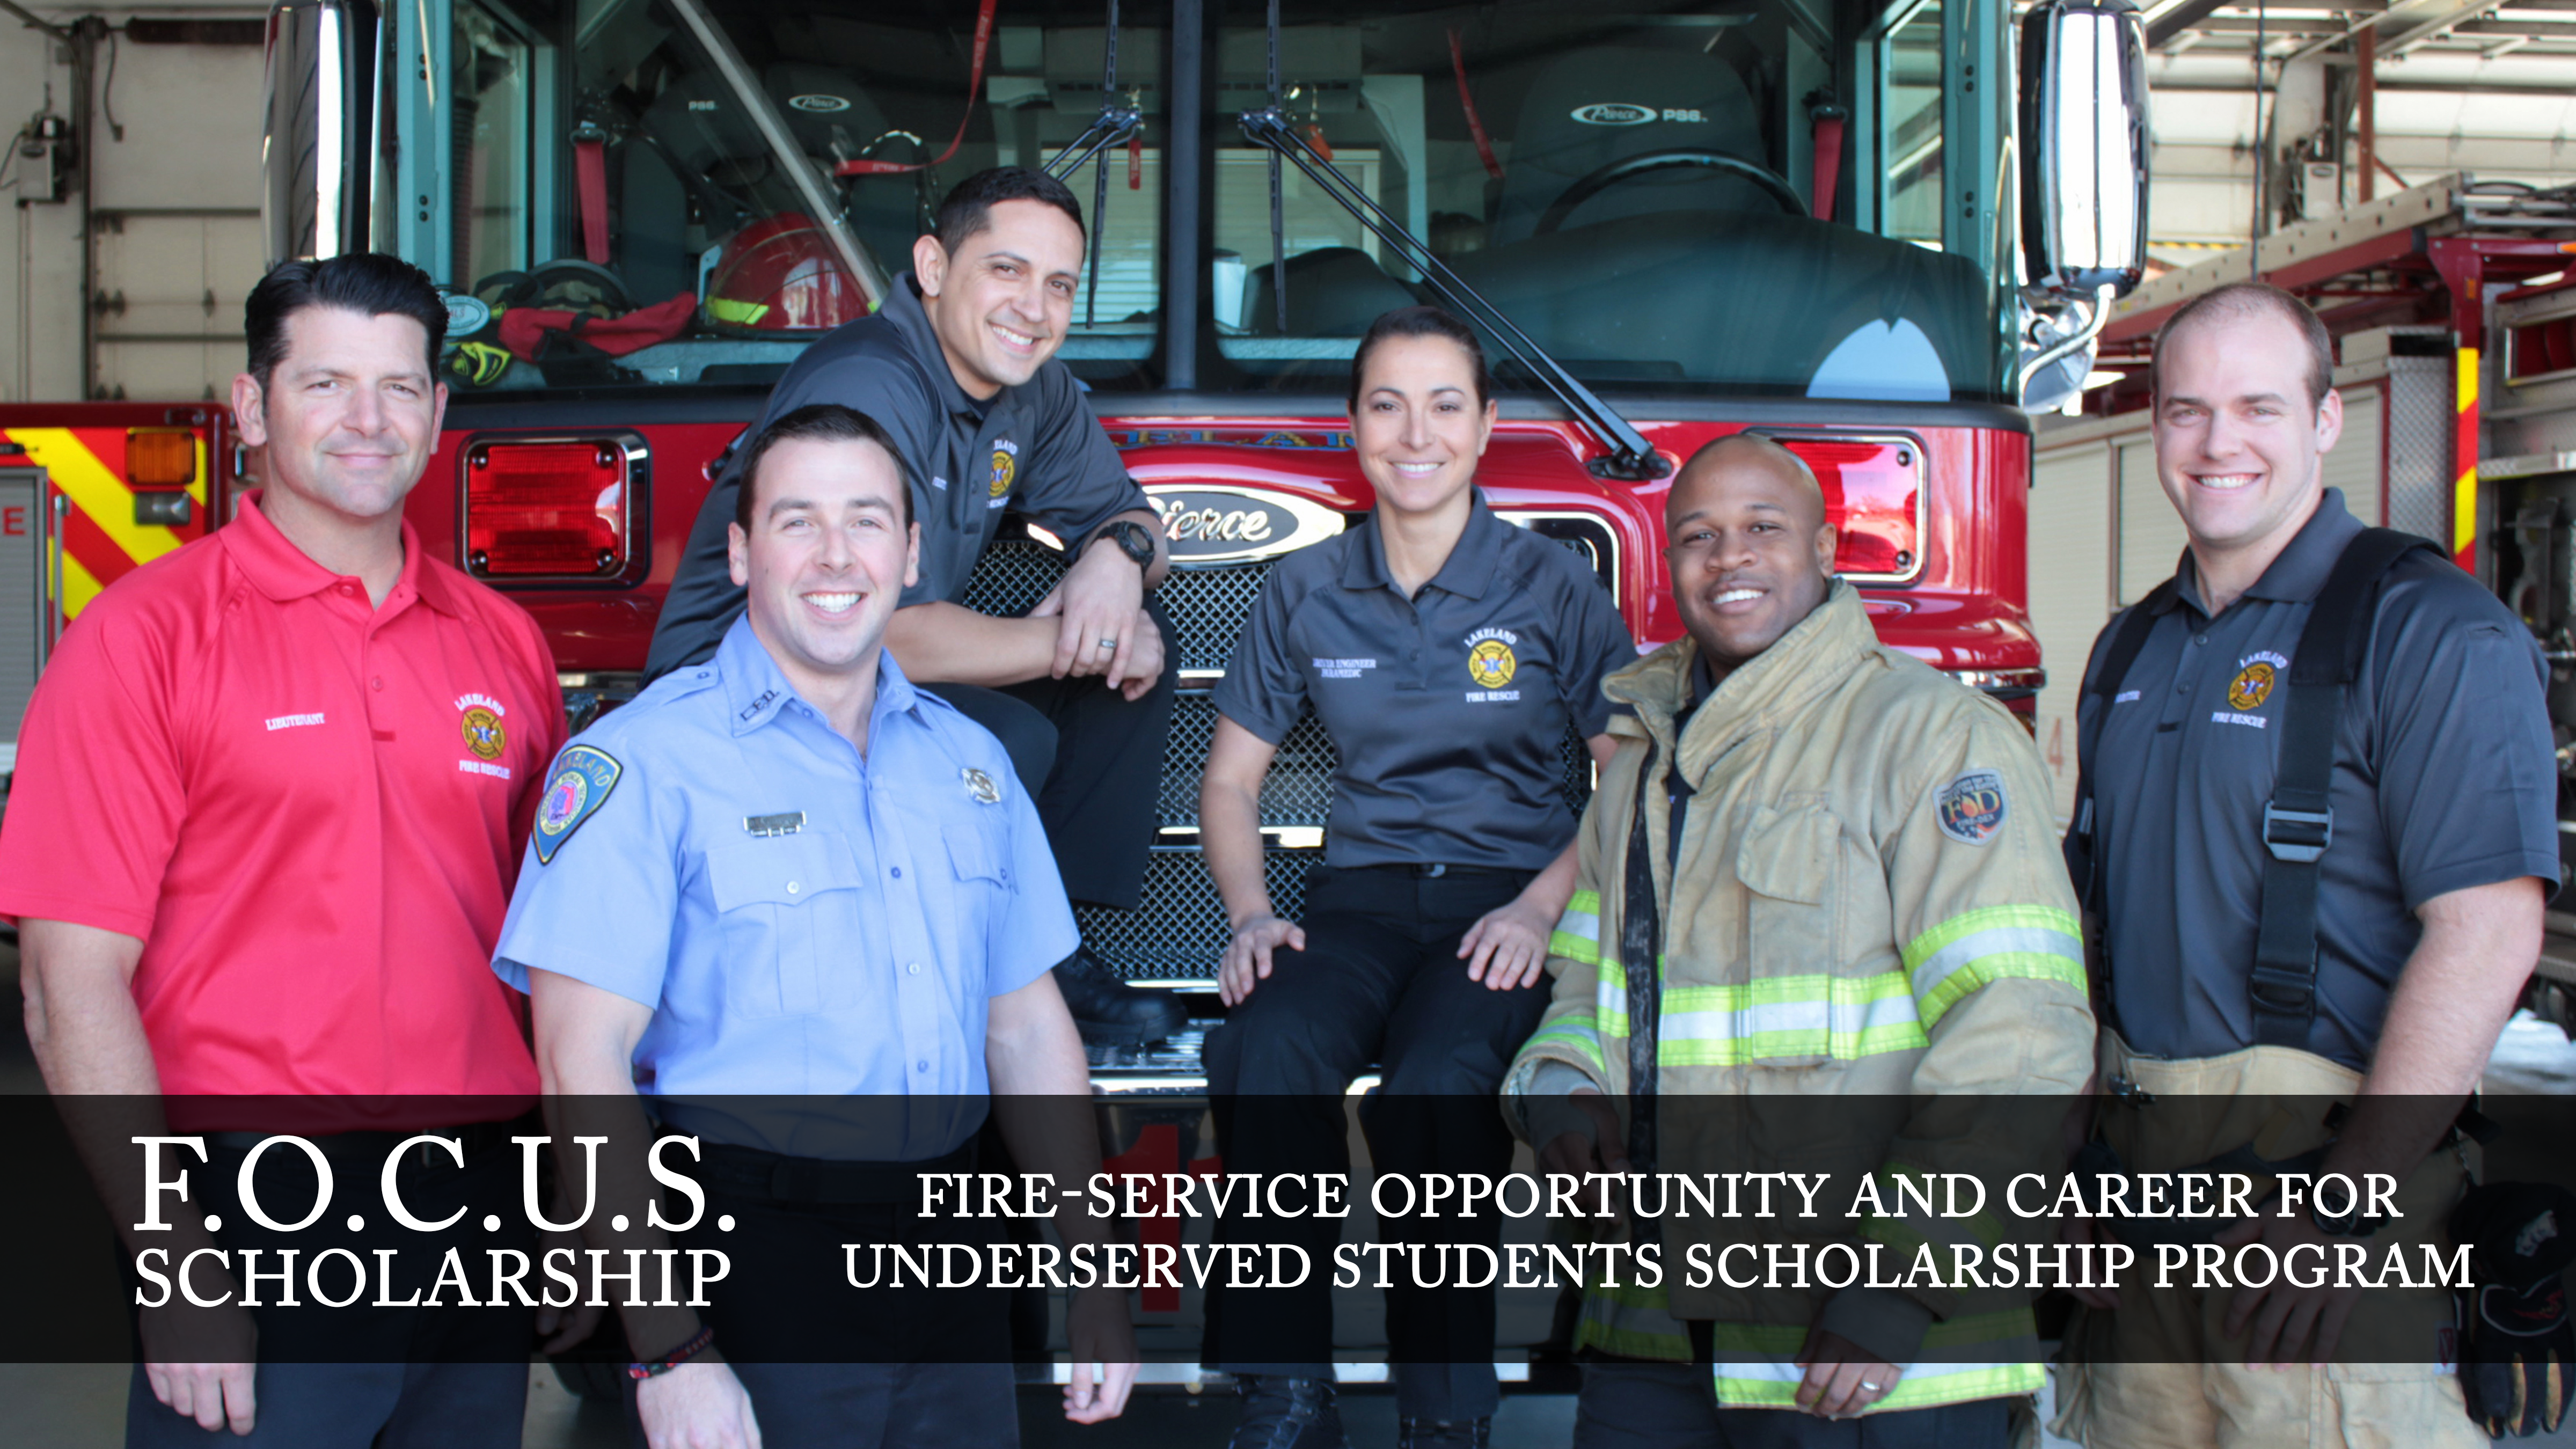 Image showing diverse group of firefighters representing the FOCUS Scholarship program